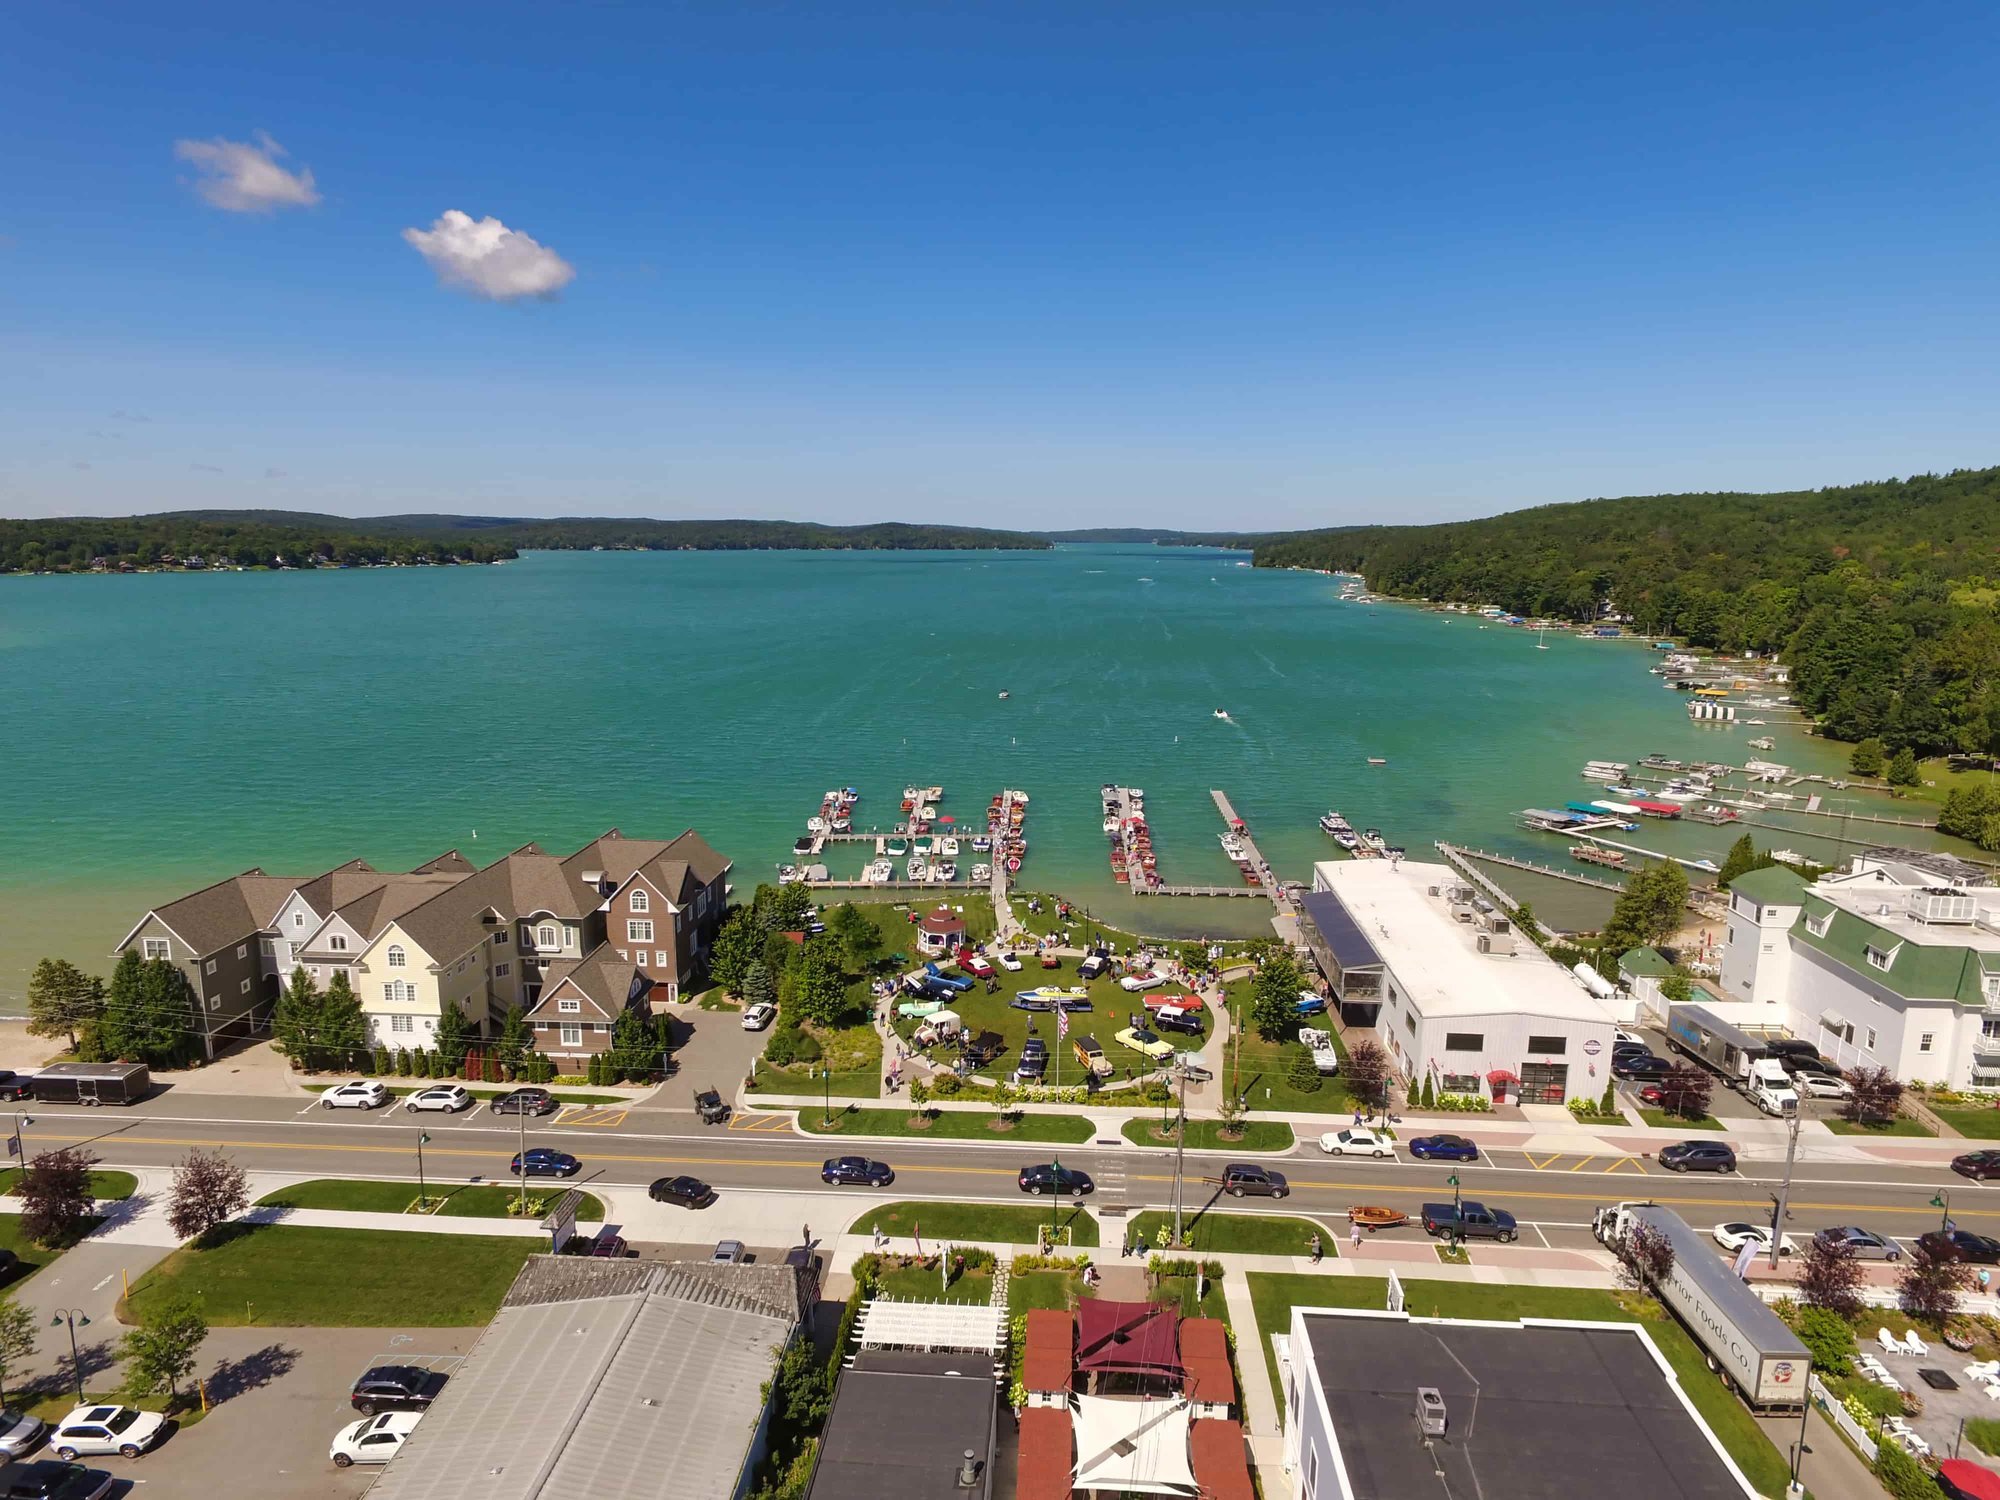 Aerial view contrasting the serene Walloon Lake with the vibrant Torch Lake.